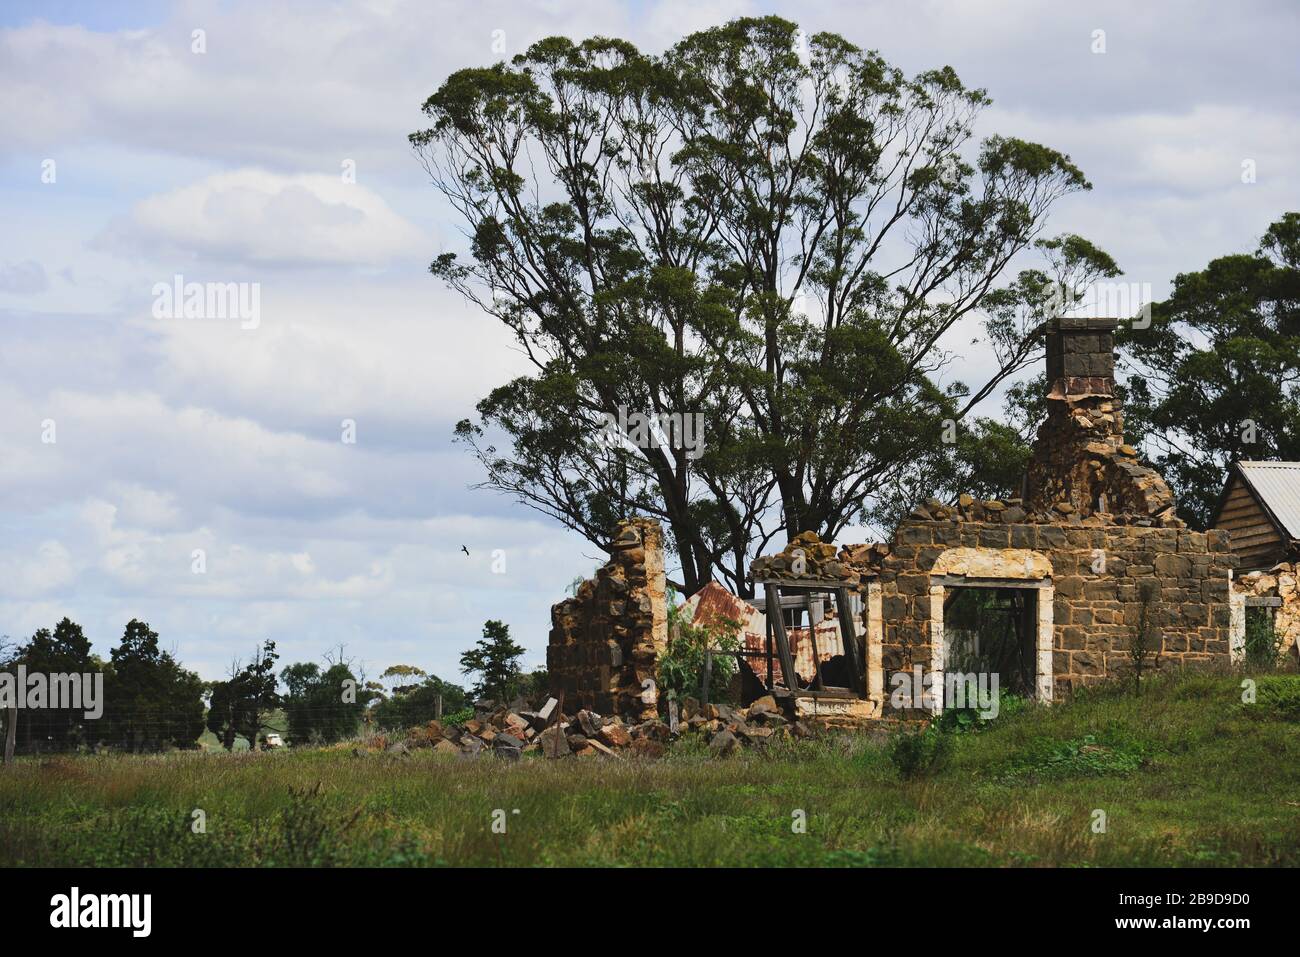 Old Stone Farmhouse in Disrepair and Falling Down Under Tree Stock Photo